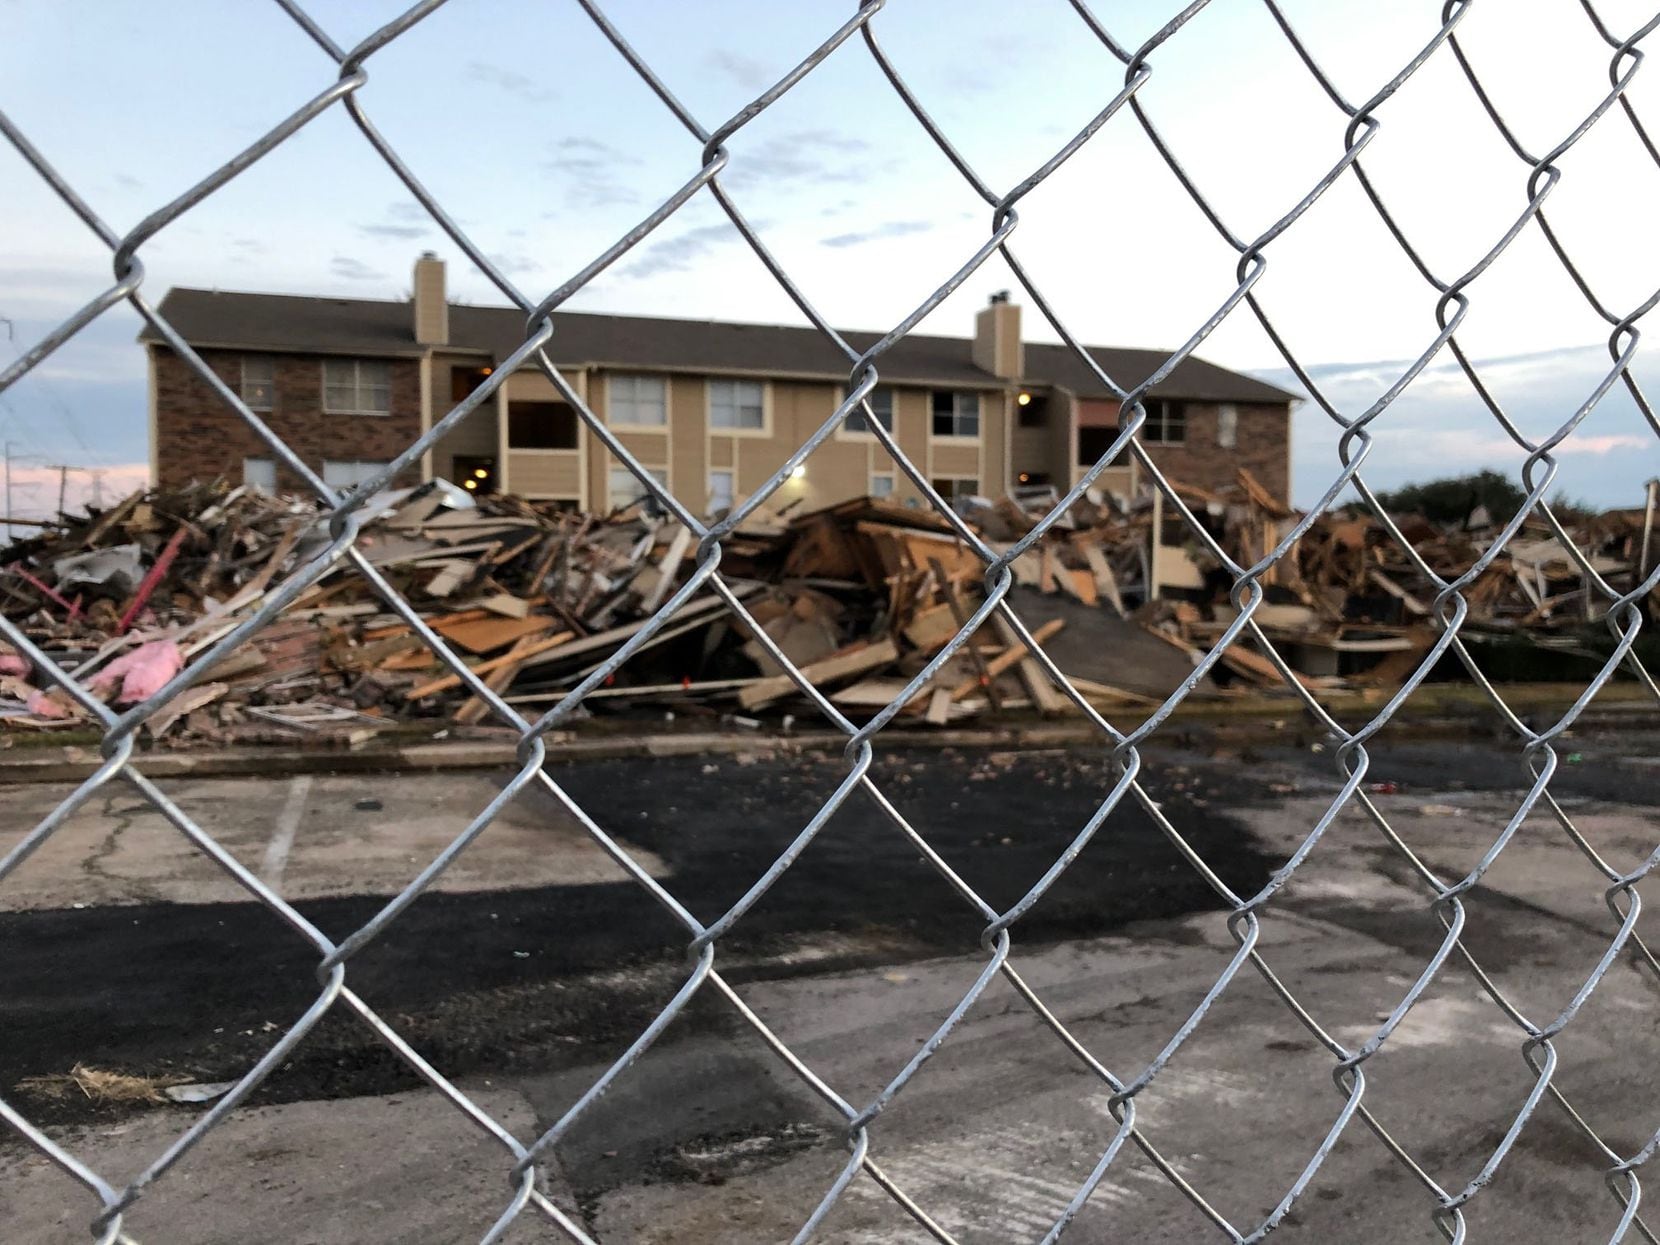 The burned Meadows at Ferguson Building F was demolished Wednesday afternoon.